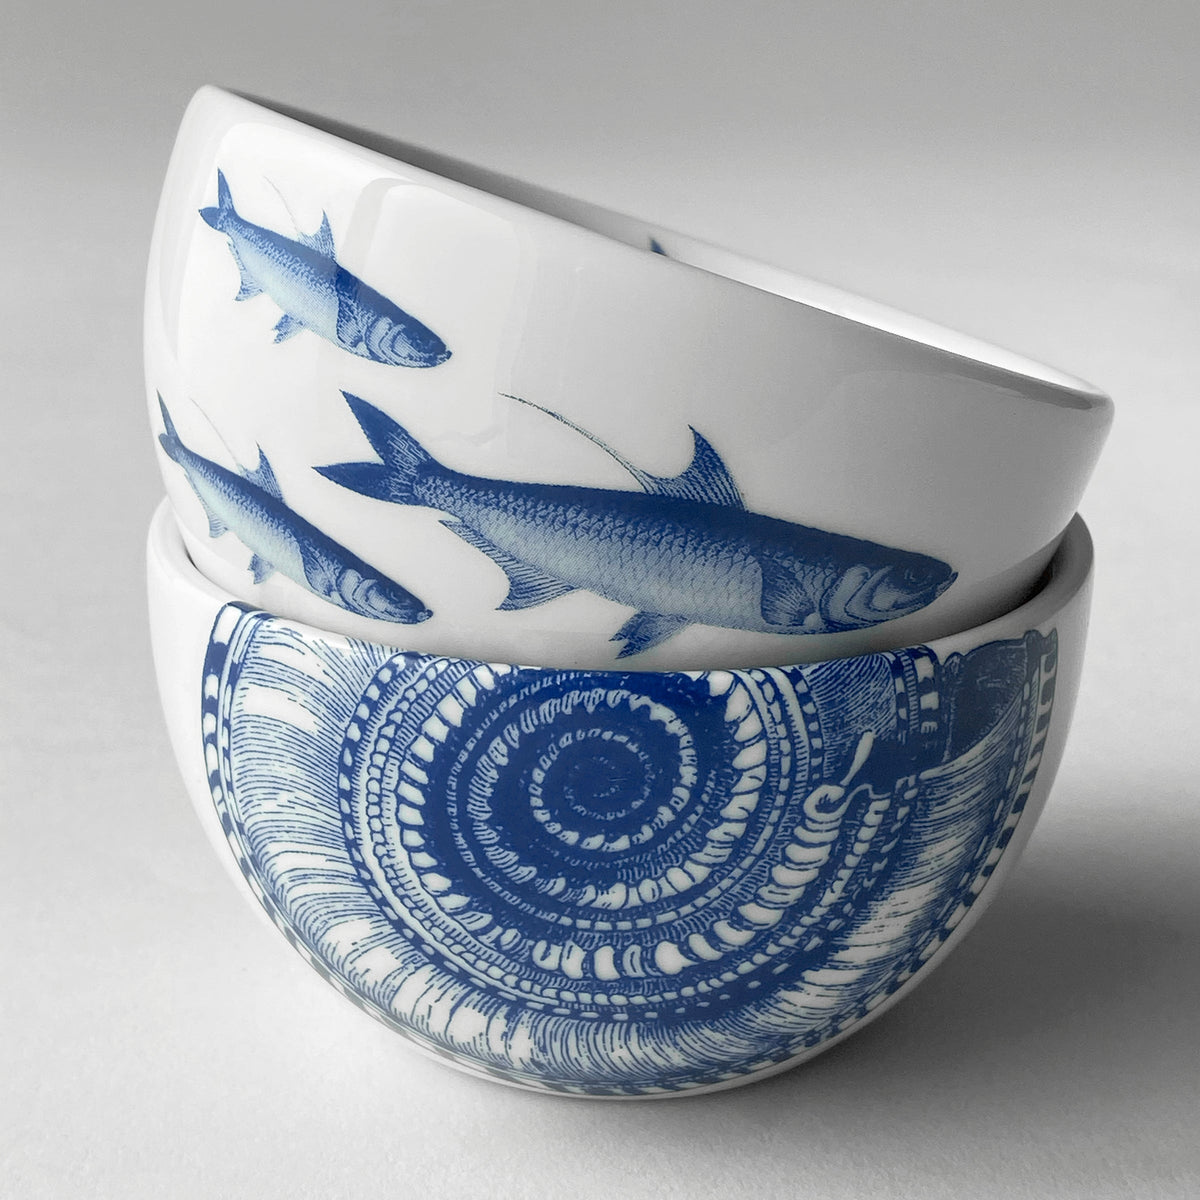 Two small blue and white Shells Snack Bowls with fish on them by Caskata Artisanal Home.